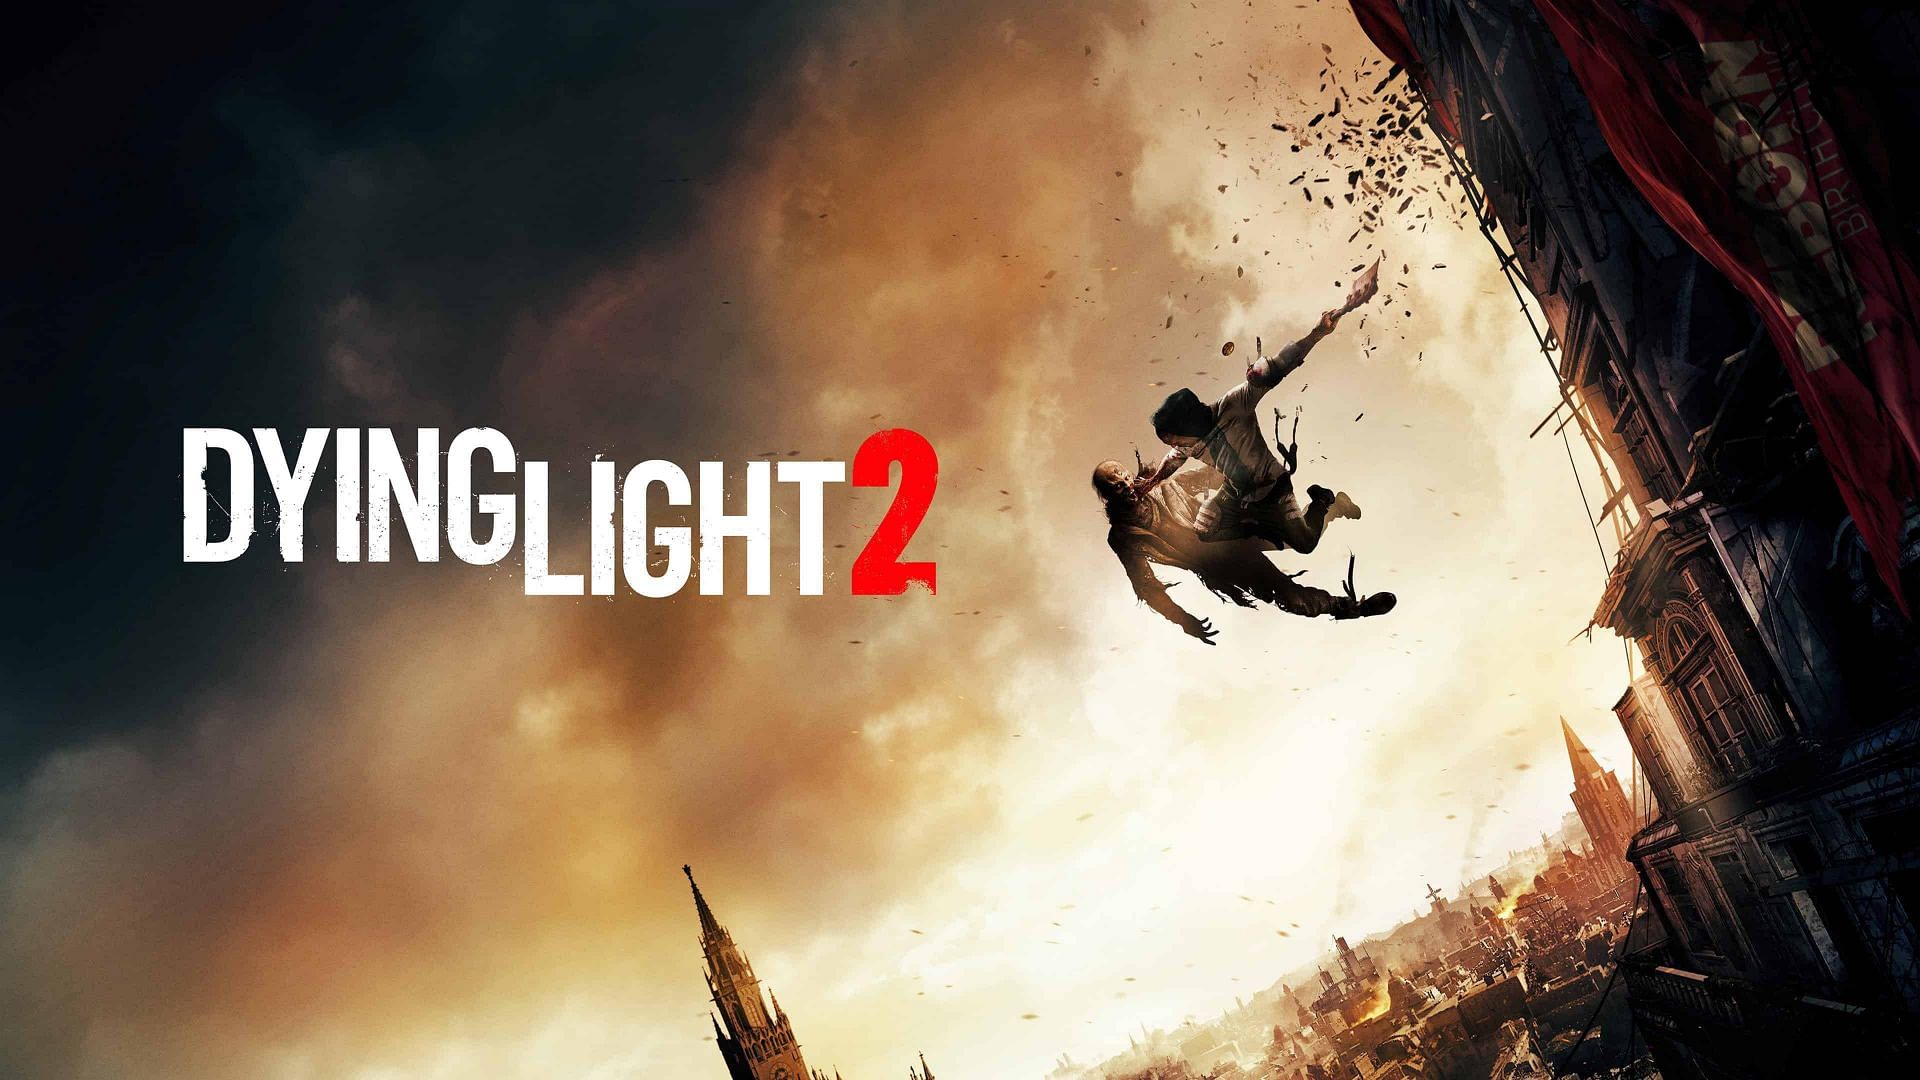 Dying Light 2 drops February 4th, 2022 (Image via Techland)